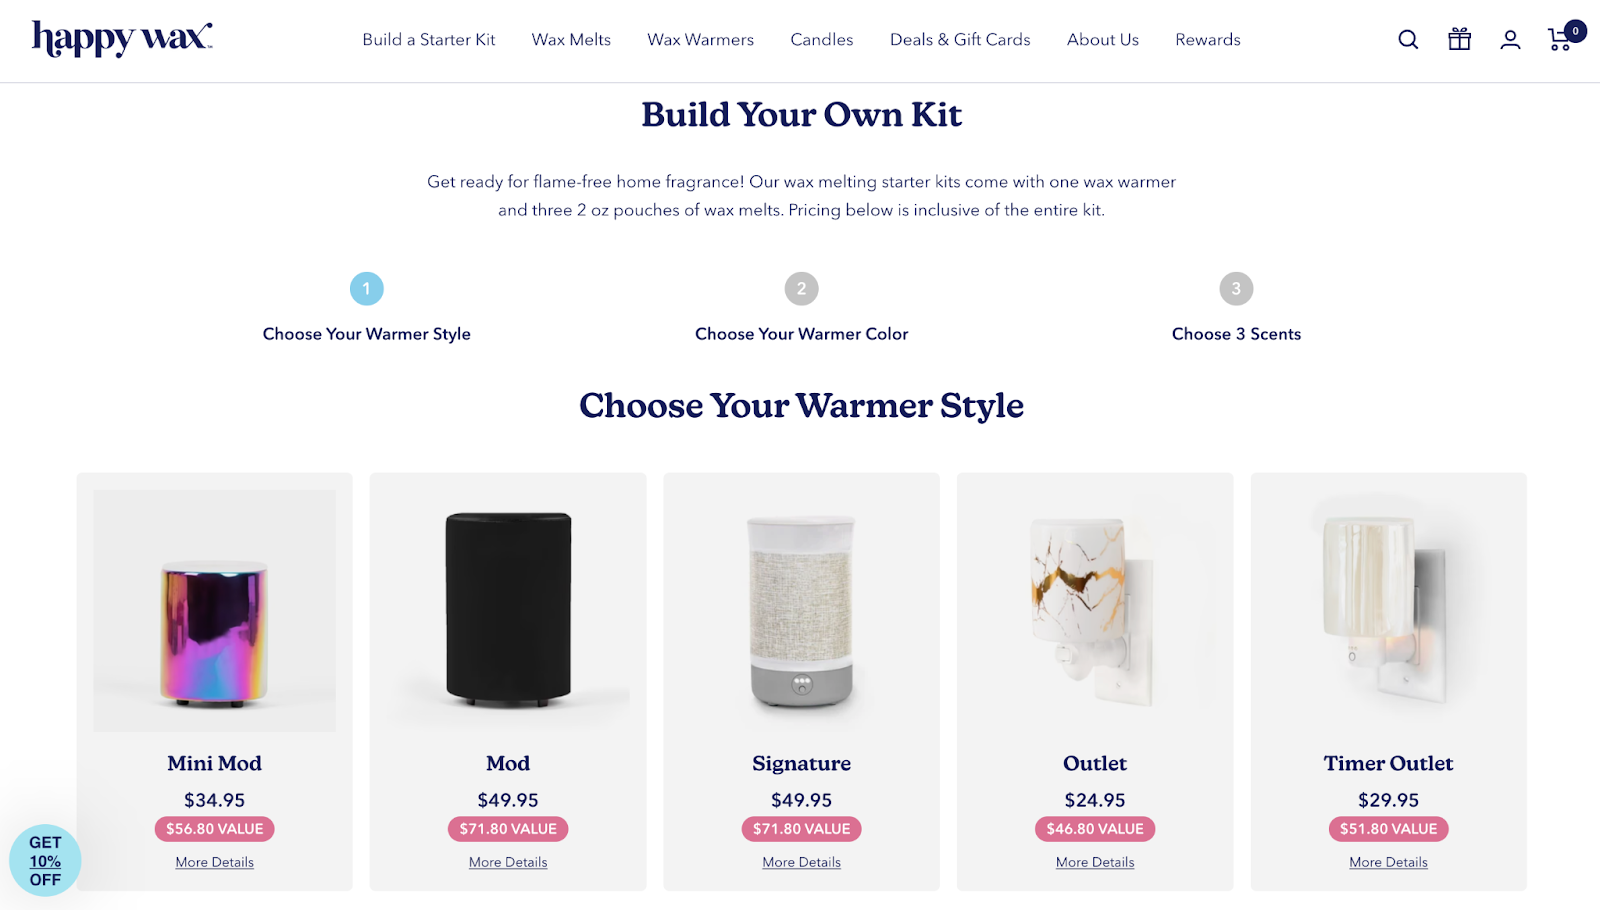 Designing High-Converting Product Bundle Landing Pages (+ 10 Examples)